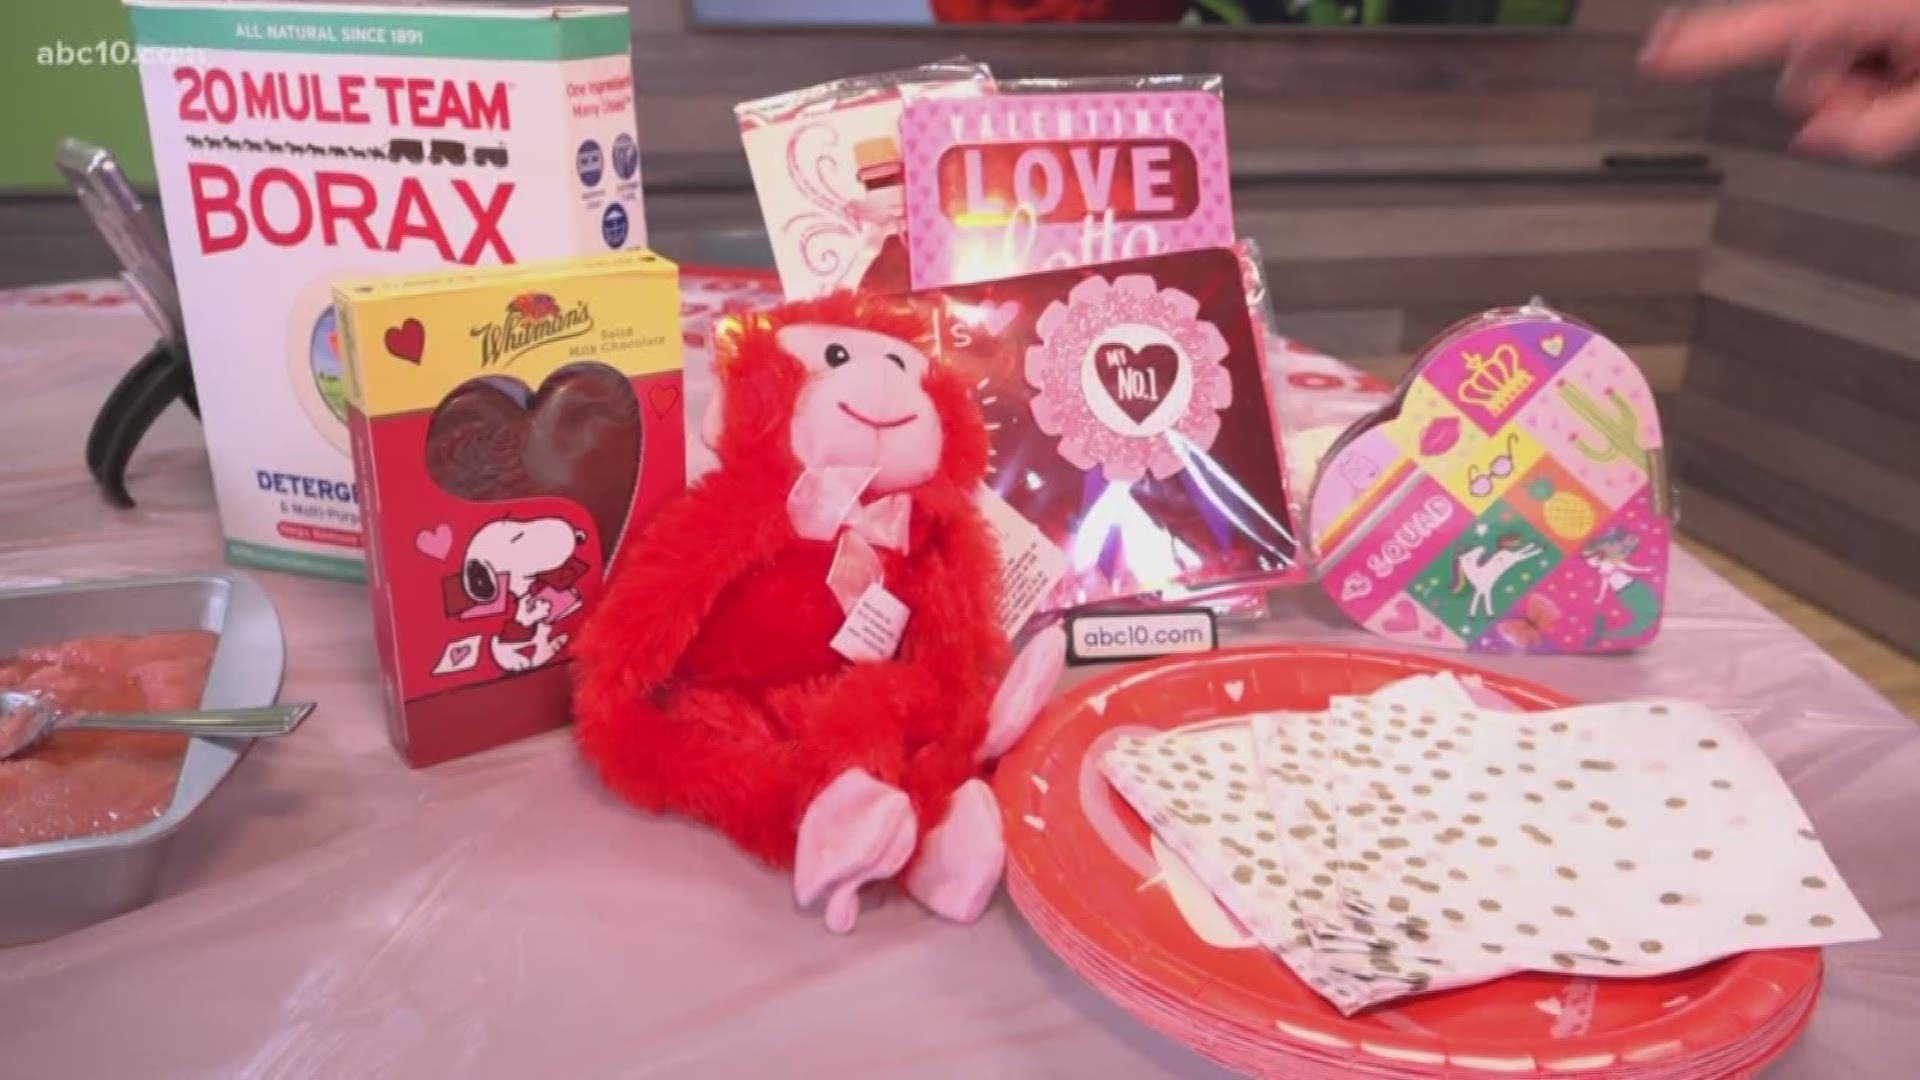 They say that you can’t buy real love, but we all know on Valentine’s Day, many certainly try! Brittany Begley has how you can save money in the process.